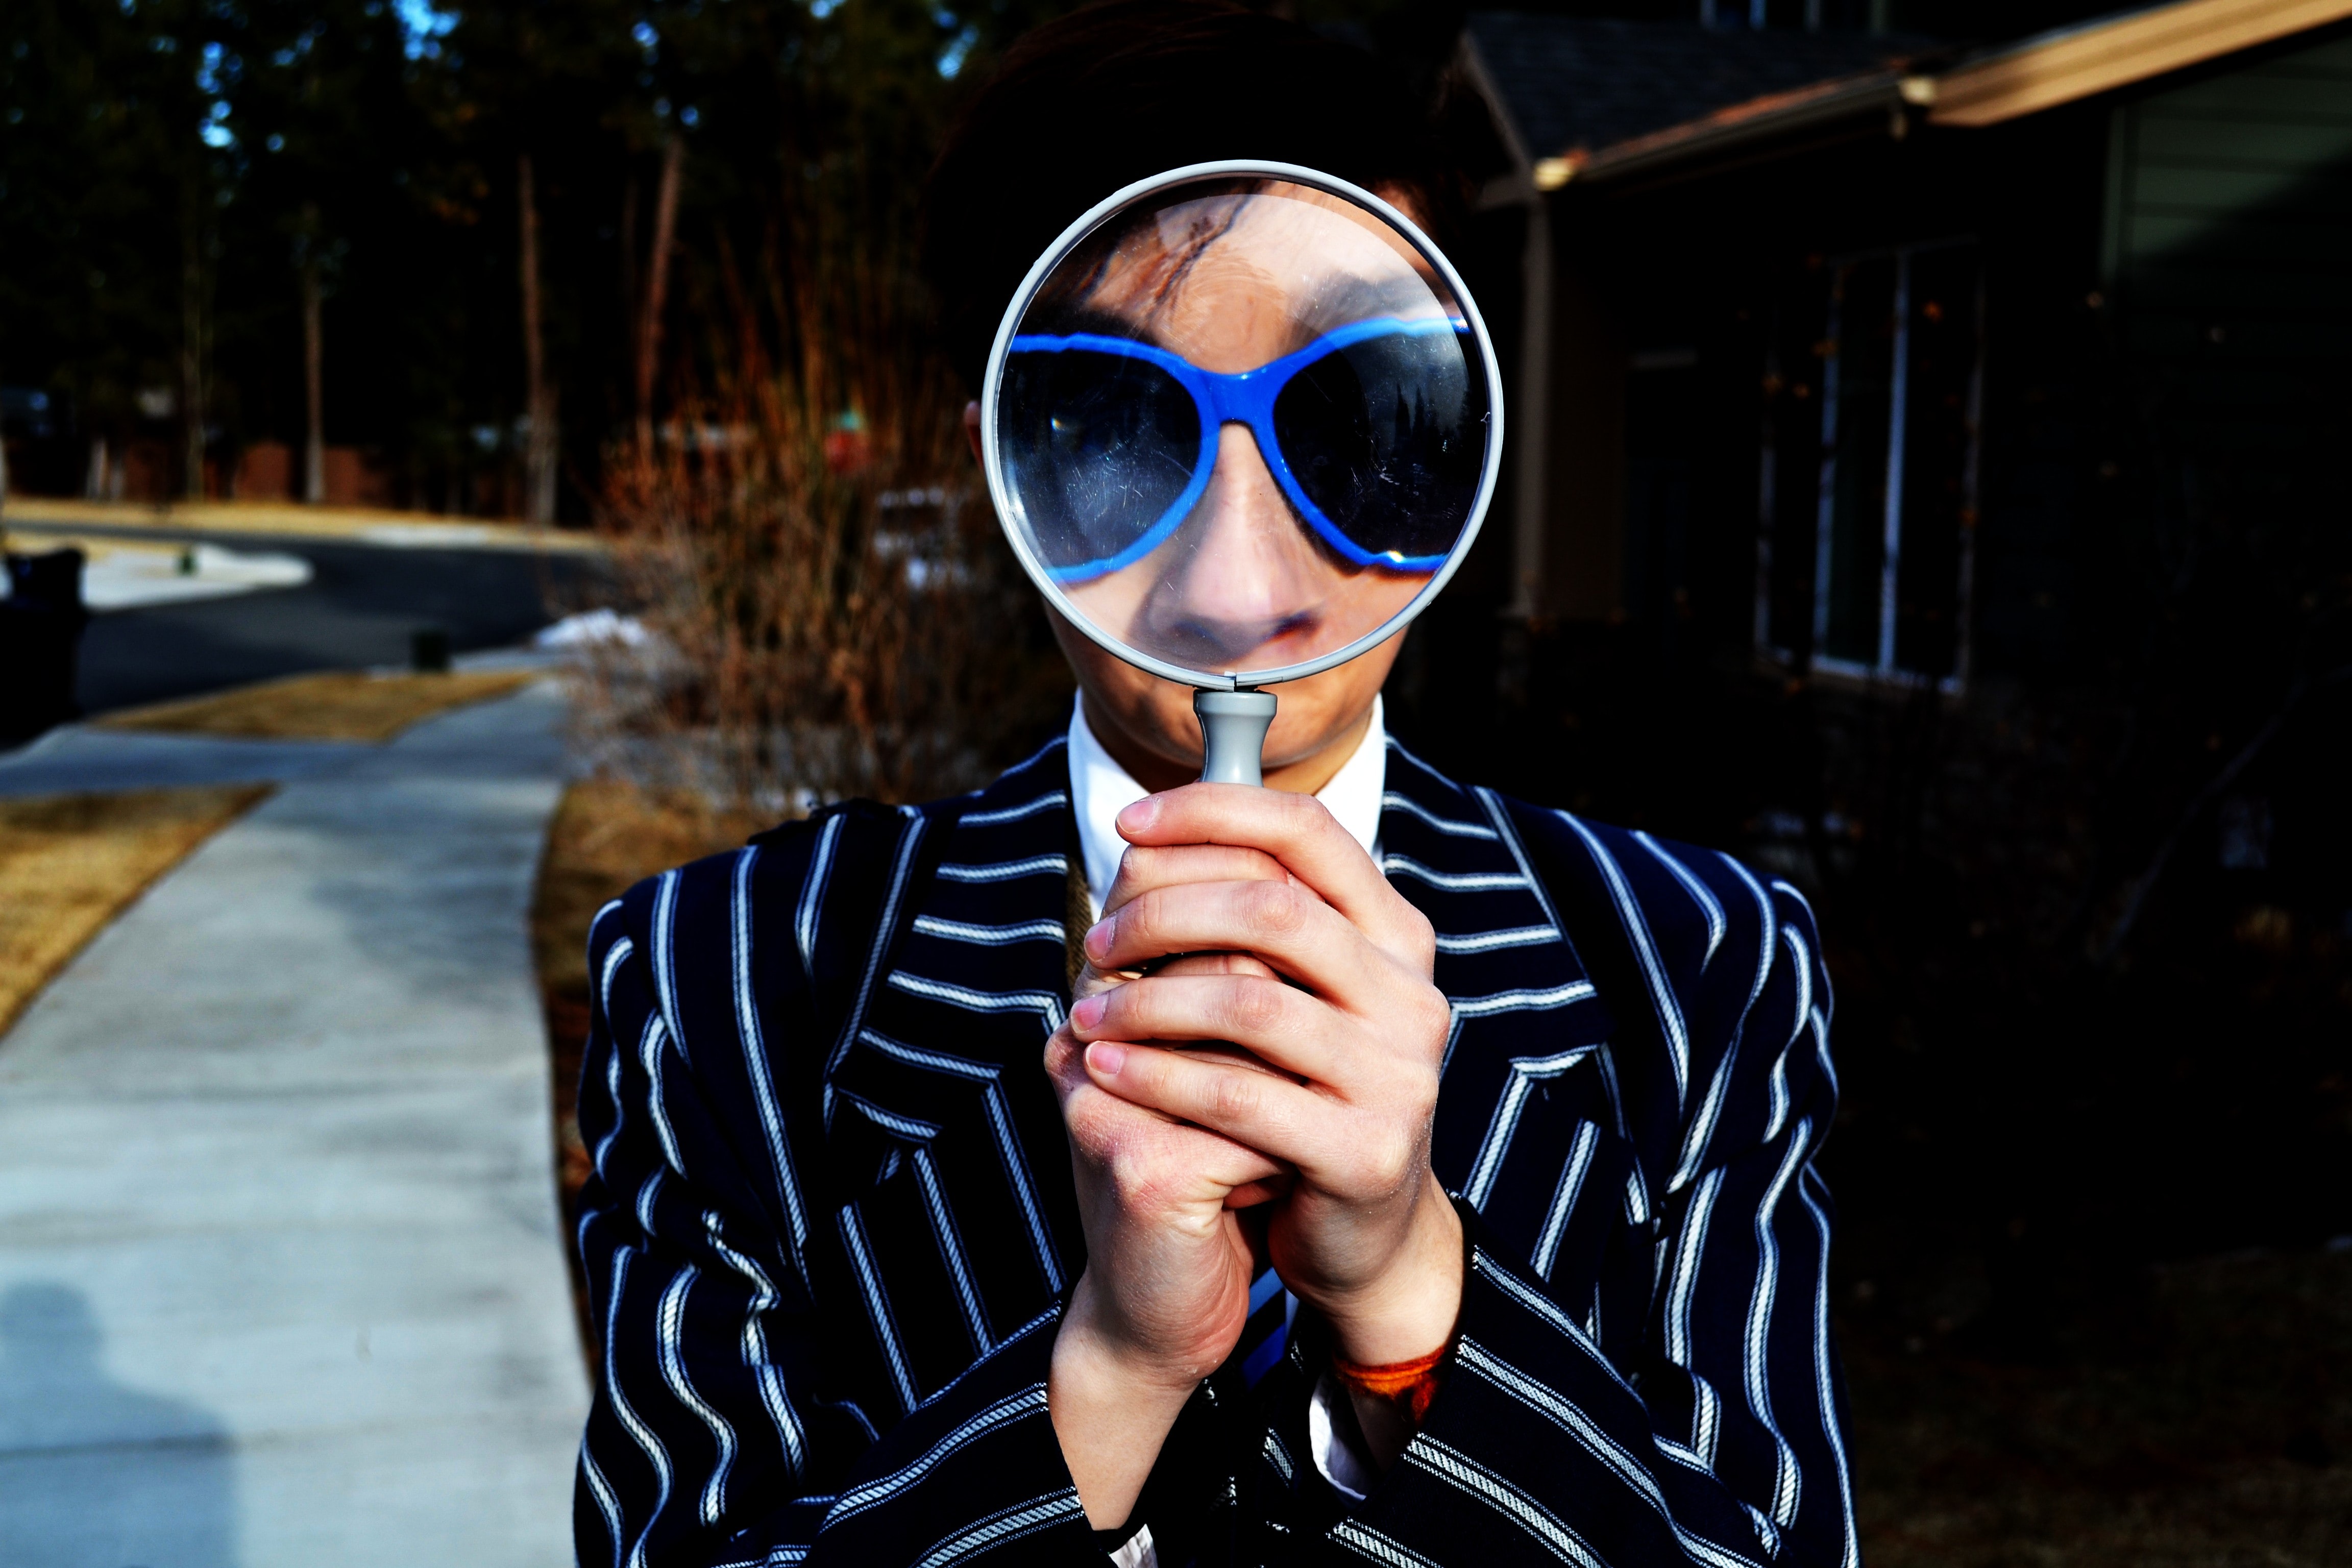 Woman searching with magnifying glass